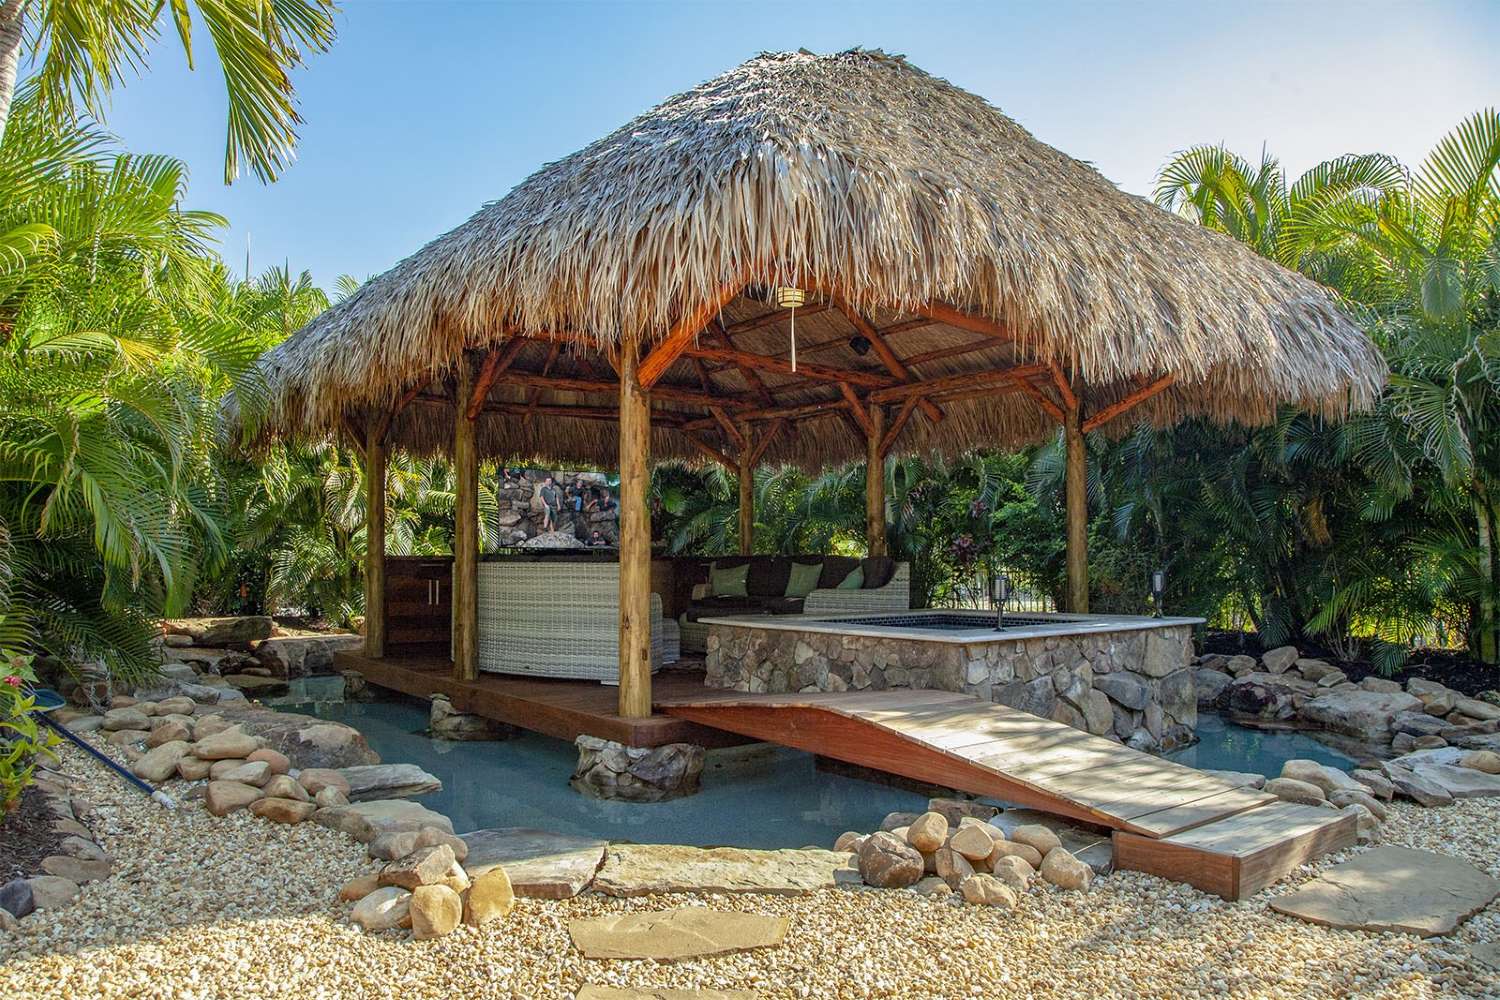 How To Build A Tiki Hut